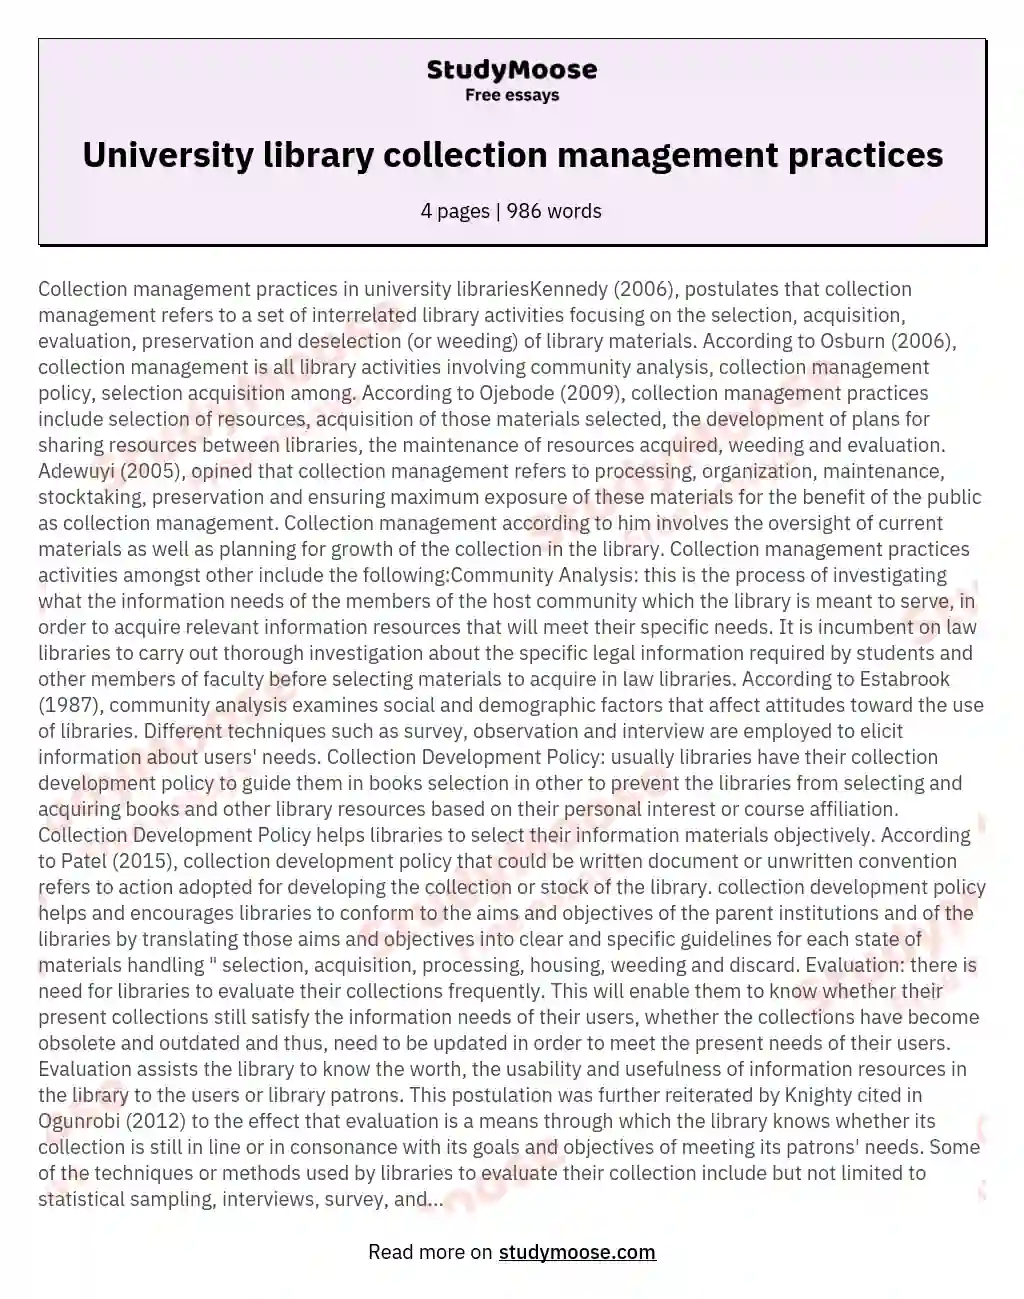 Collection management practices in university librariesKennedy 2006 postulates that collection management refers